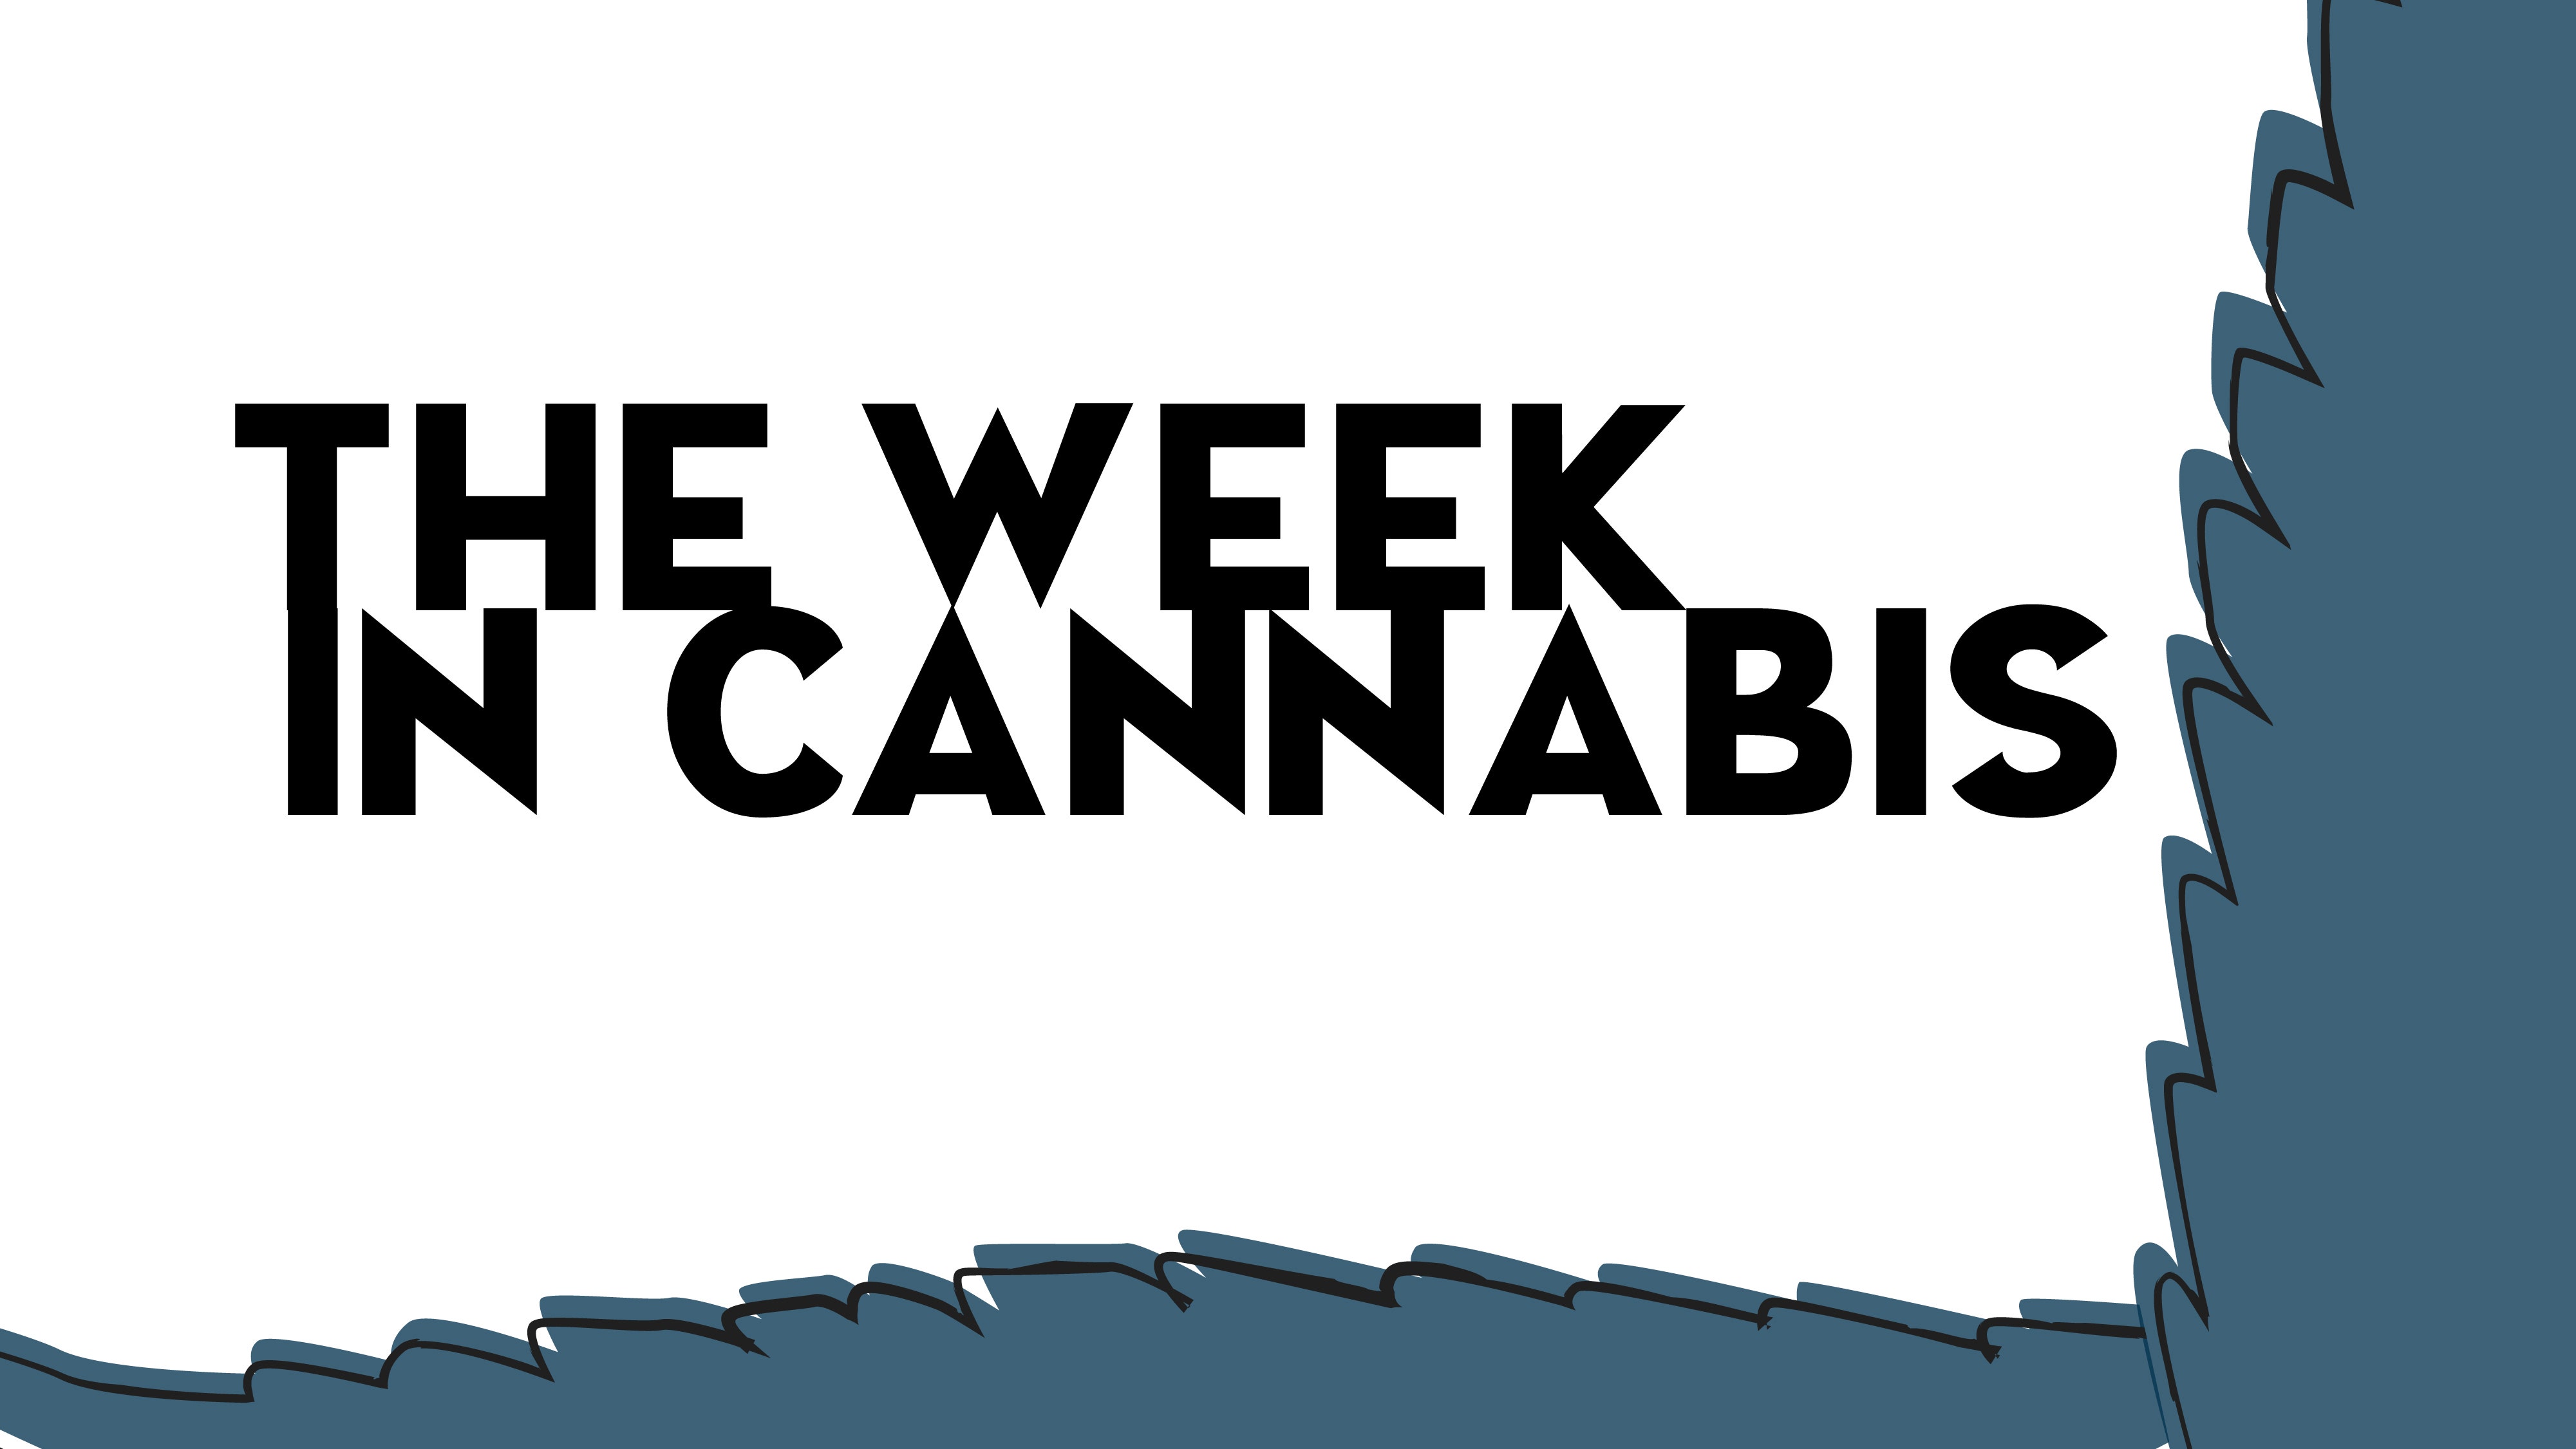 The Week In Cannabis: PharmaCann Could IPO, Tilray & MedMen, First Black CEO At Major Public Co. And More